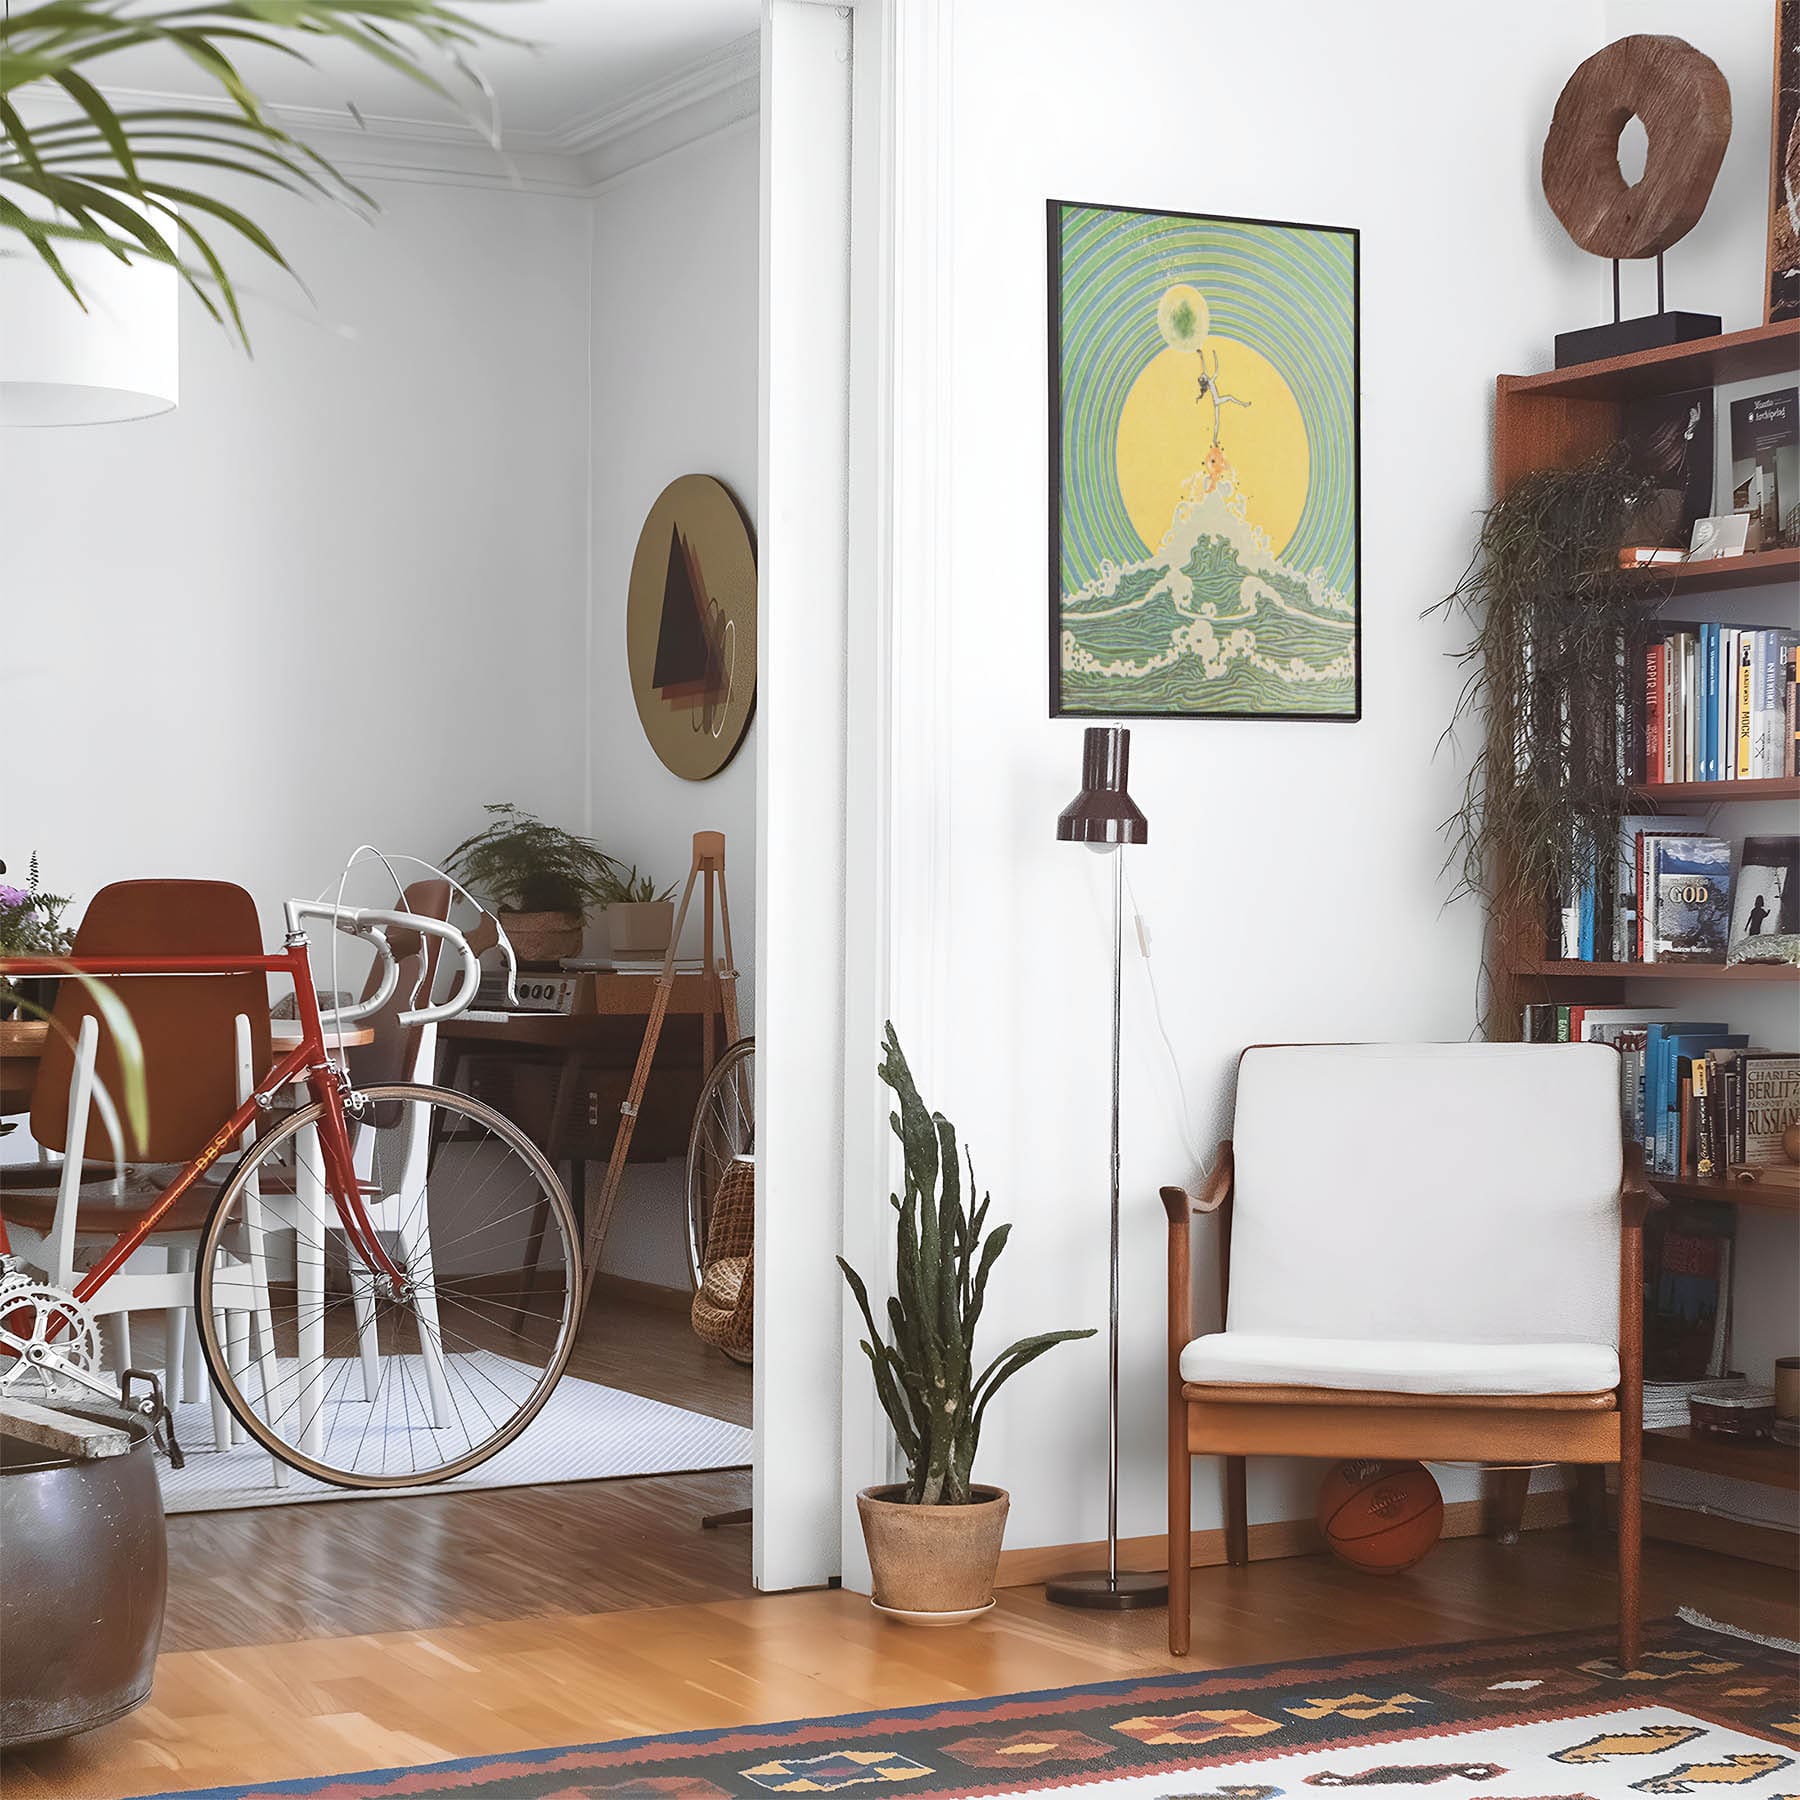 Eclectic living room with a road bike, bookshelf and house plants that features framed artwork of a Green and Yellow Fantasy above a chair and lamp